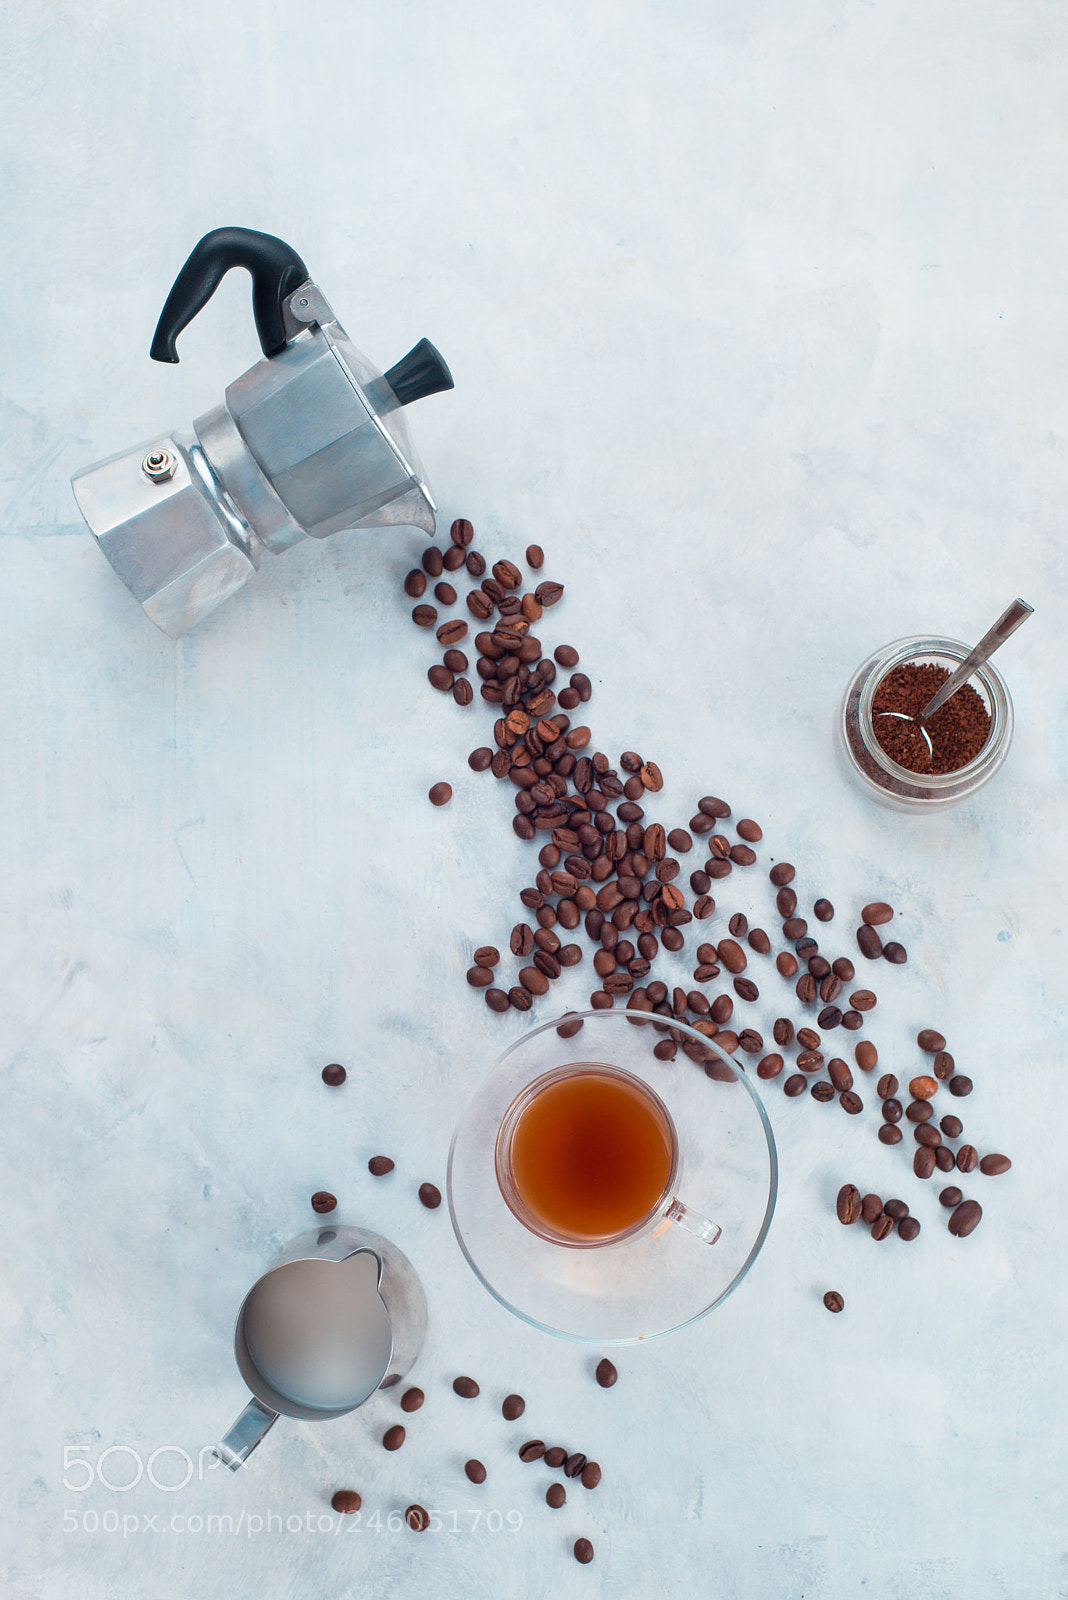 Nikon D800 sample photo. Pouring coffee beans from photography